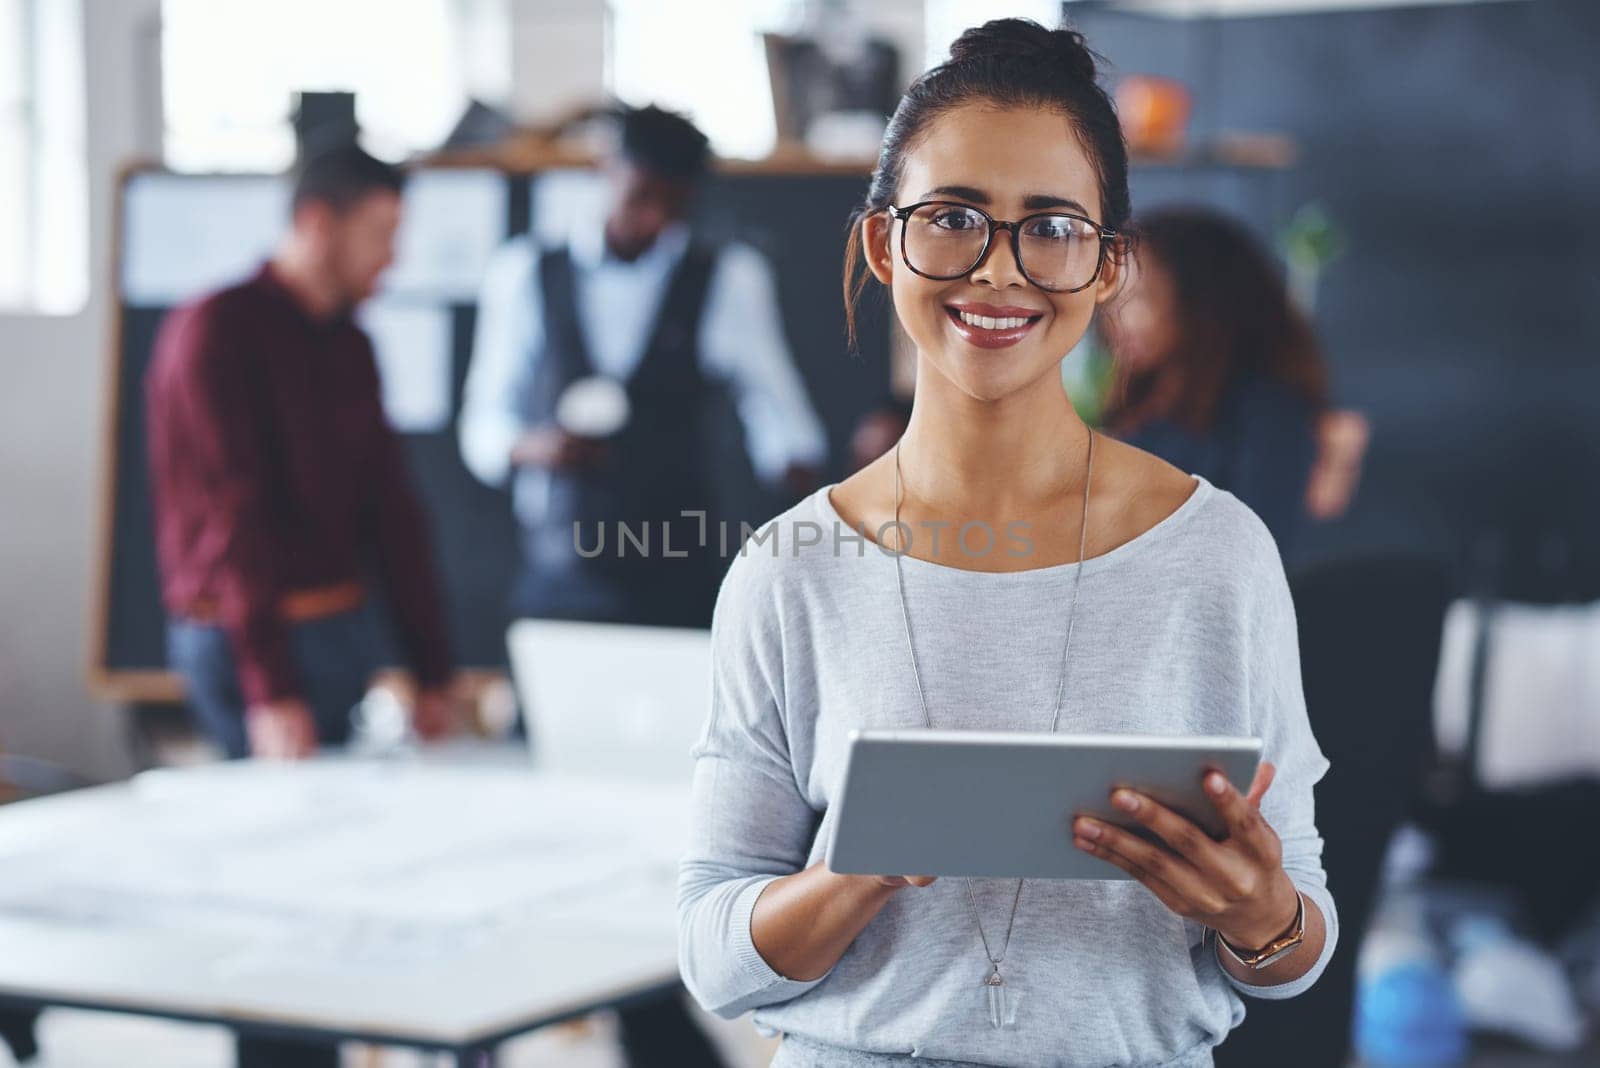 This tablet makes designing easy. Cropped portrait of an attractive young businesswoman using a tablet in the office with her colleagues in the background. by YuriArcurs